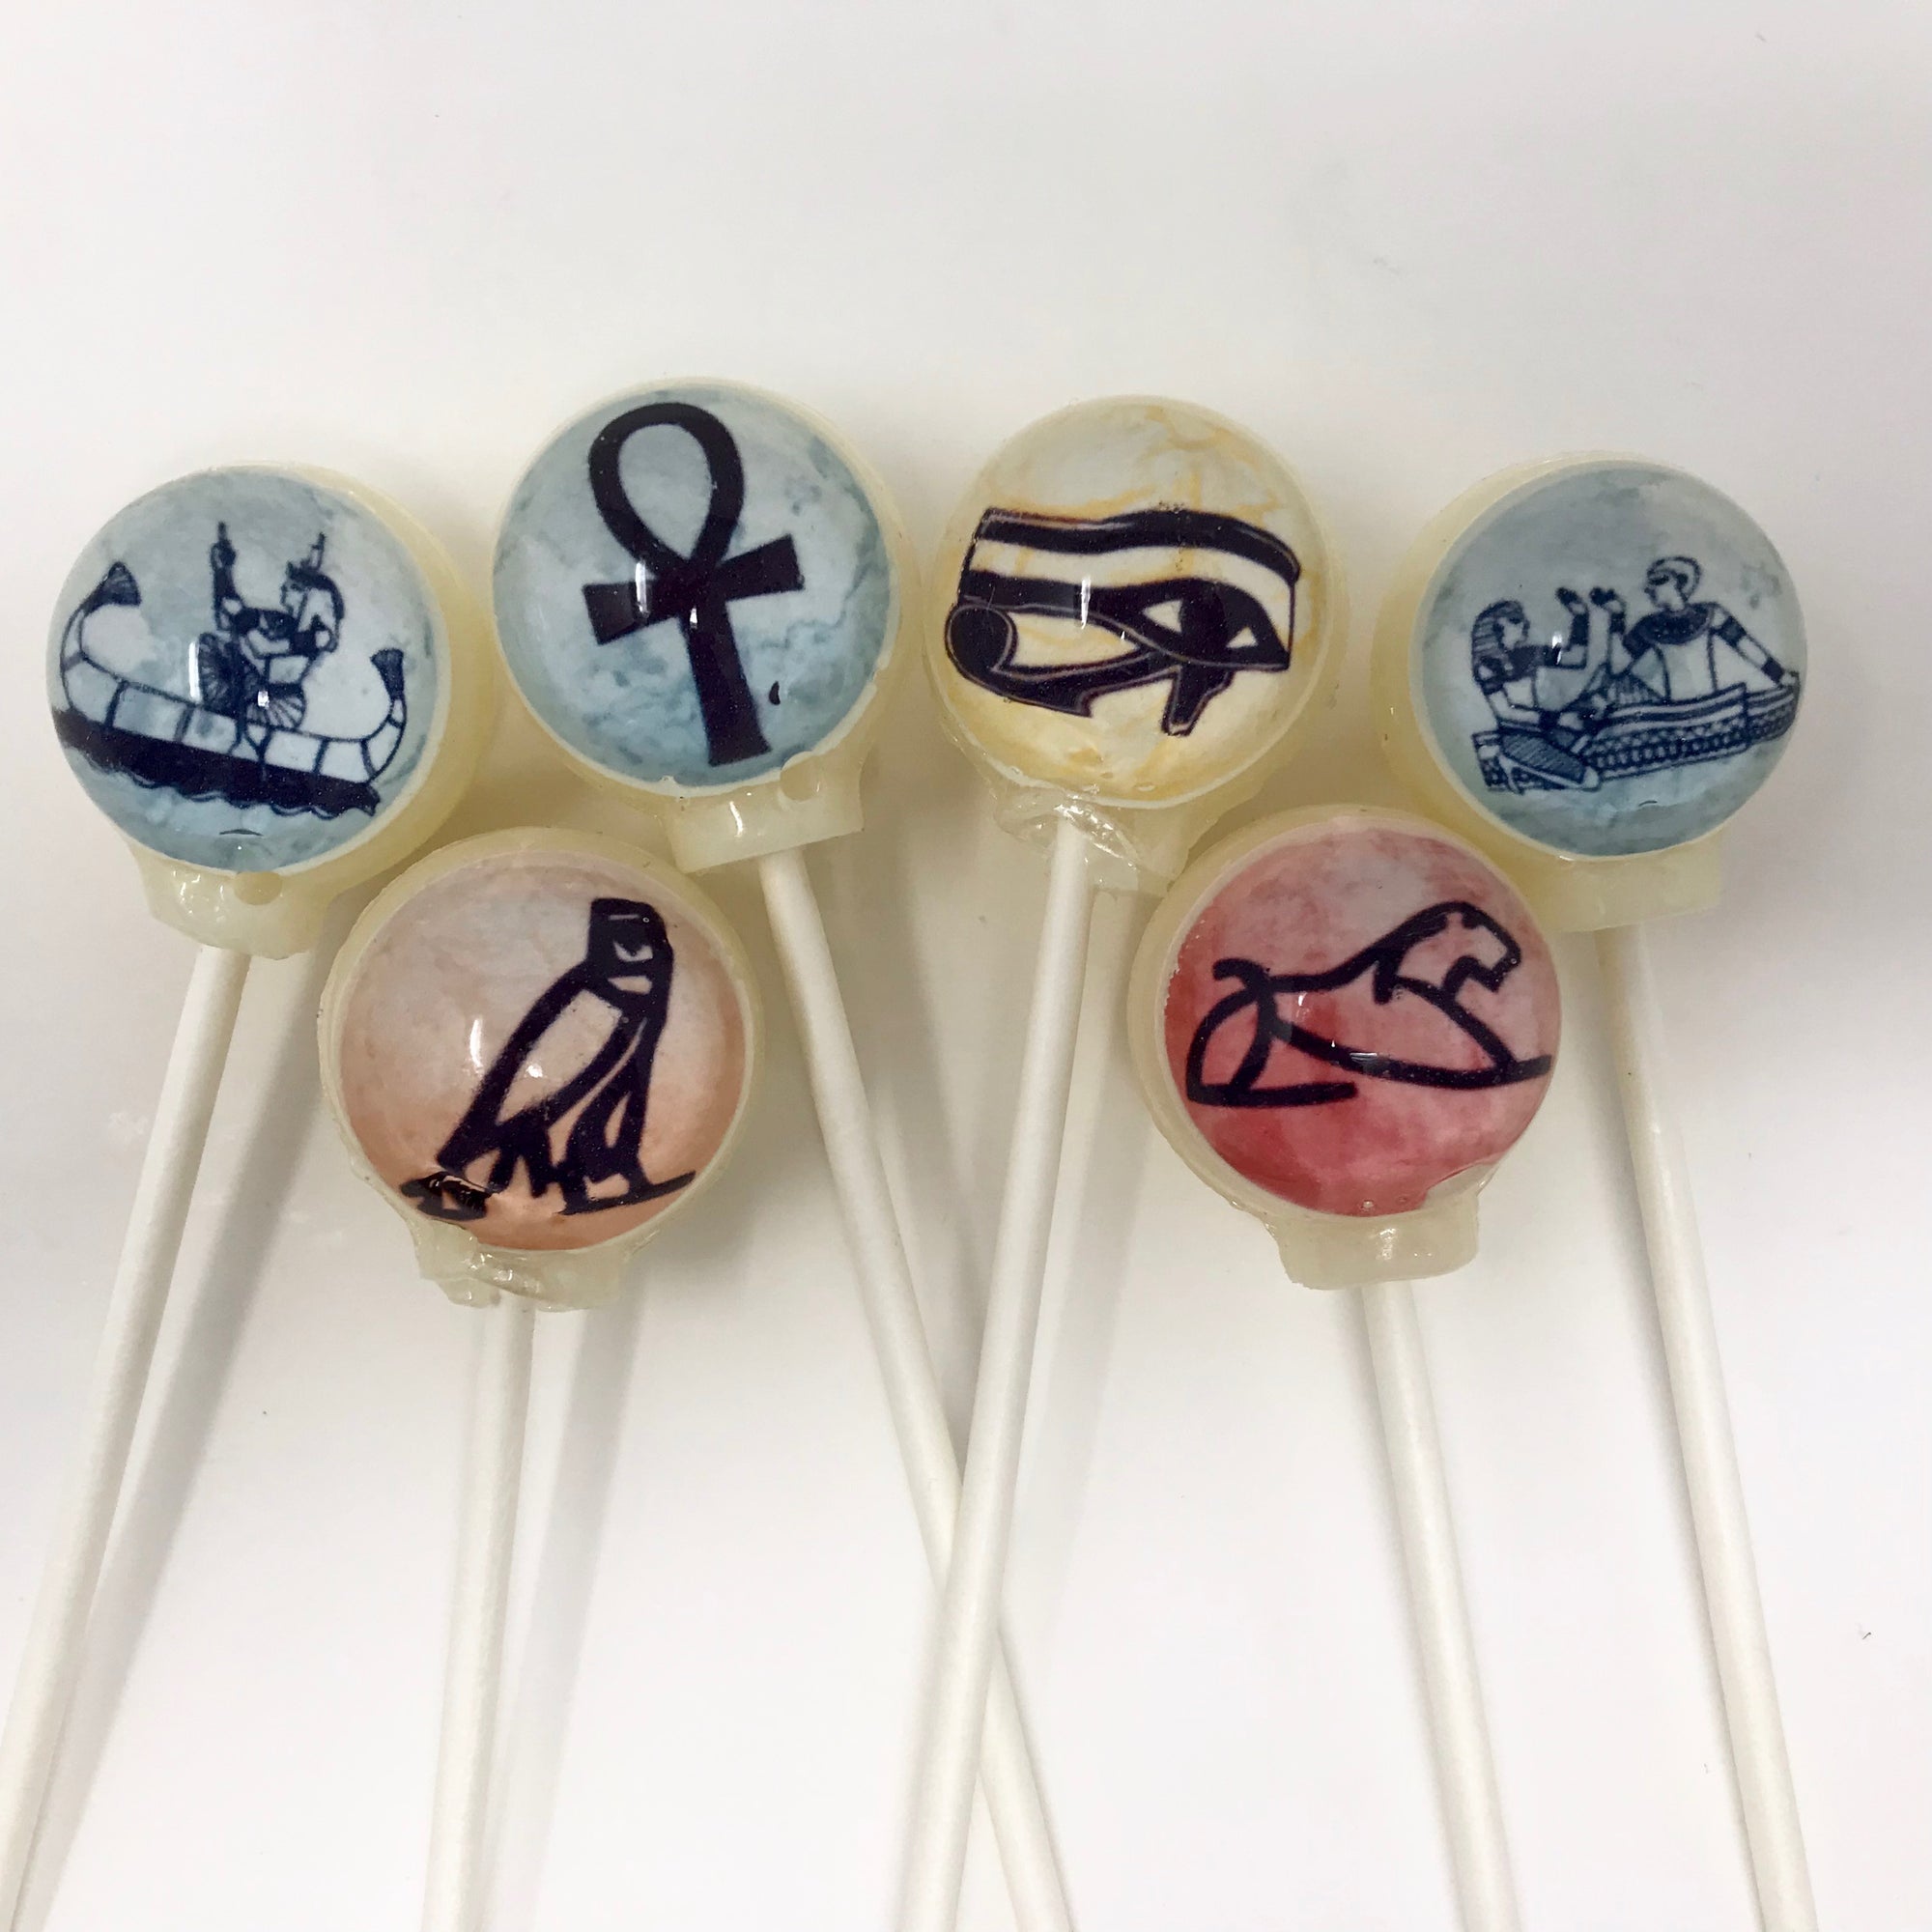 Egyptian Icon Lollipops 6-piece set by I Want Candy!